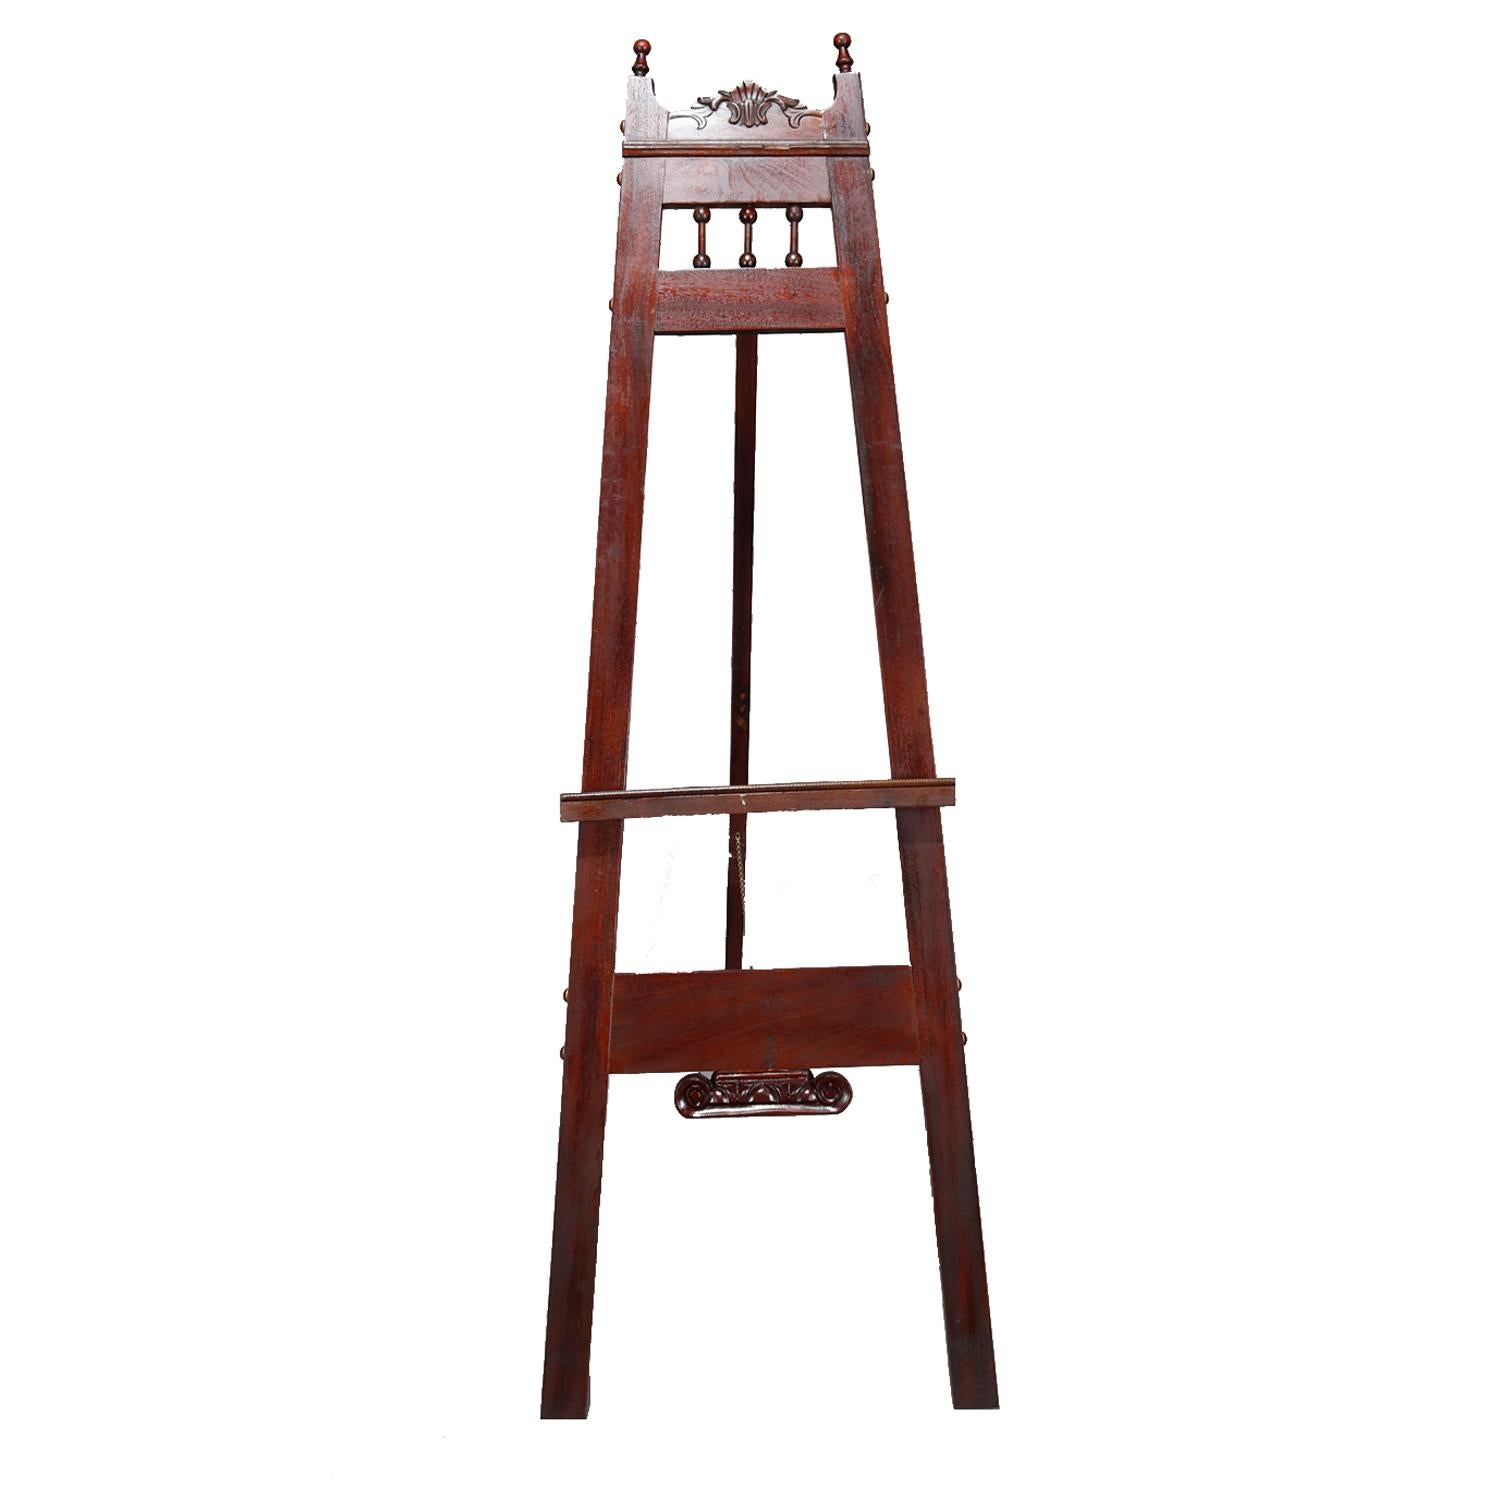 An antique Victorian Eastlake art easel offers walnut construction with carved stylized shell and foiate crest with flanking turned finials and surmounting stick and ball rail, circa 1880

Measures: 63